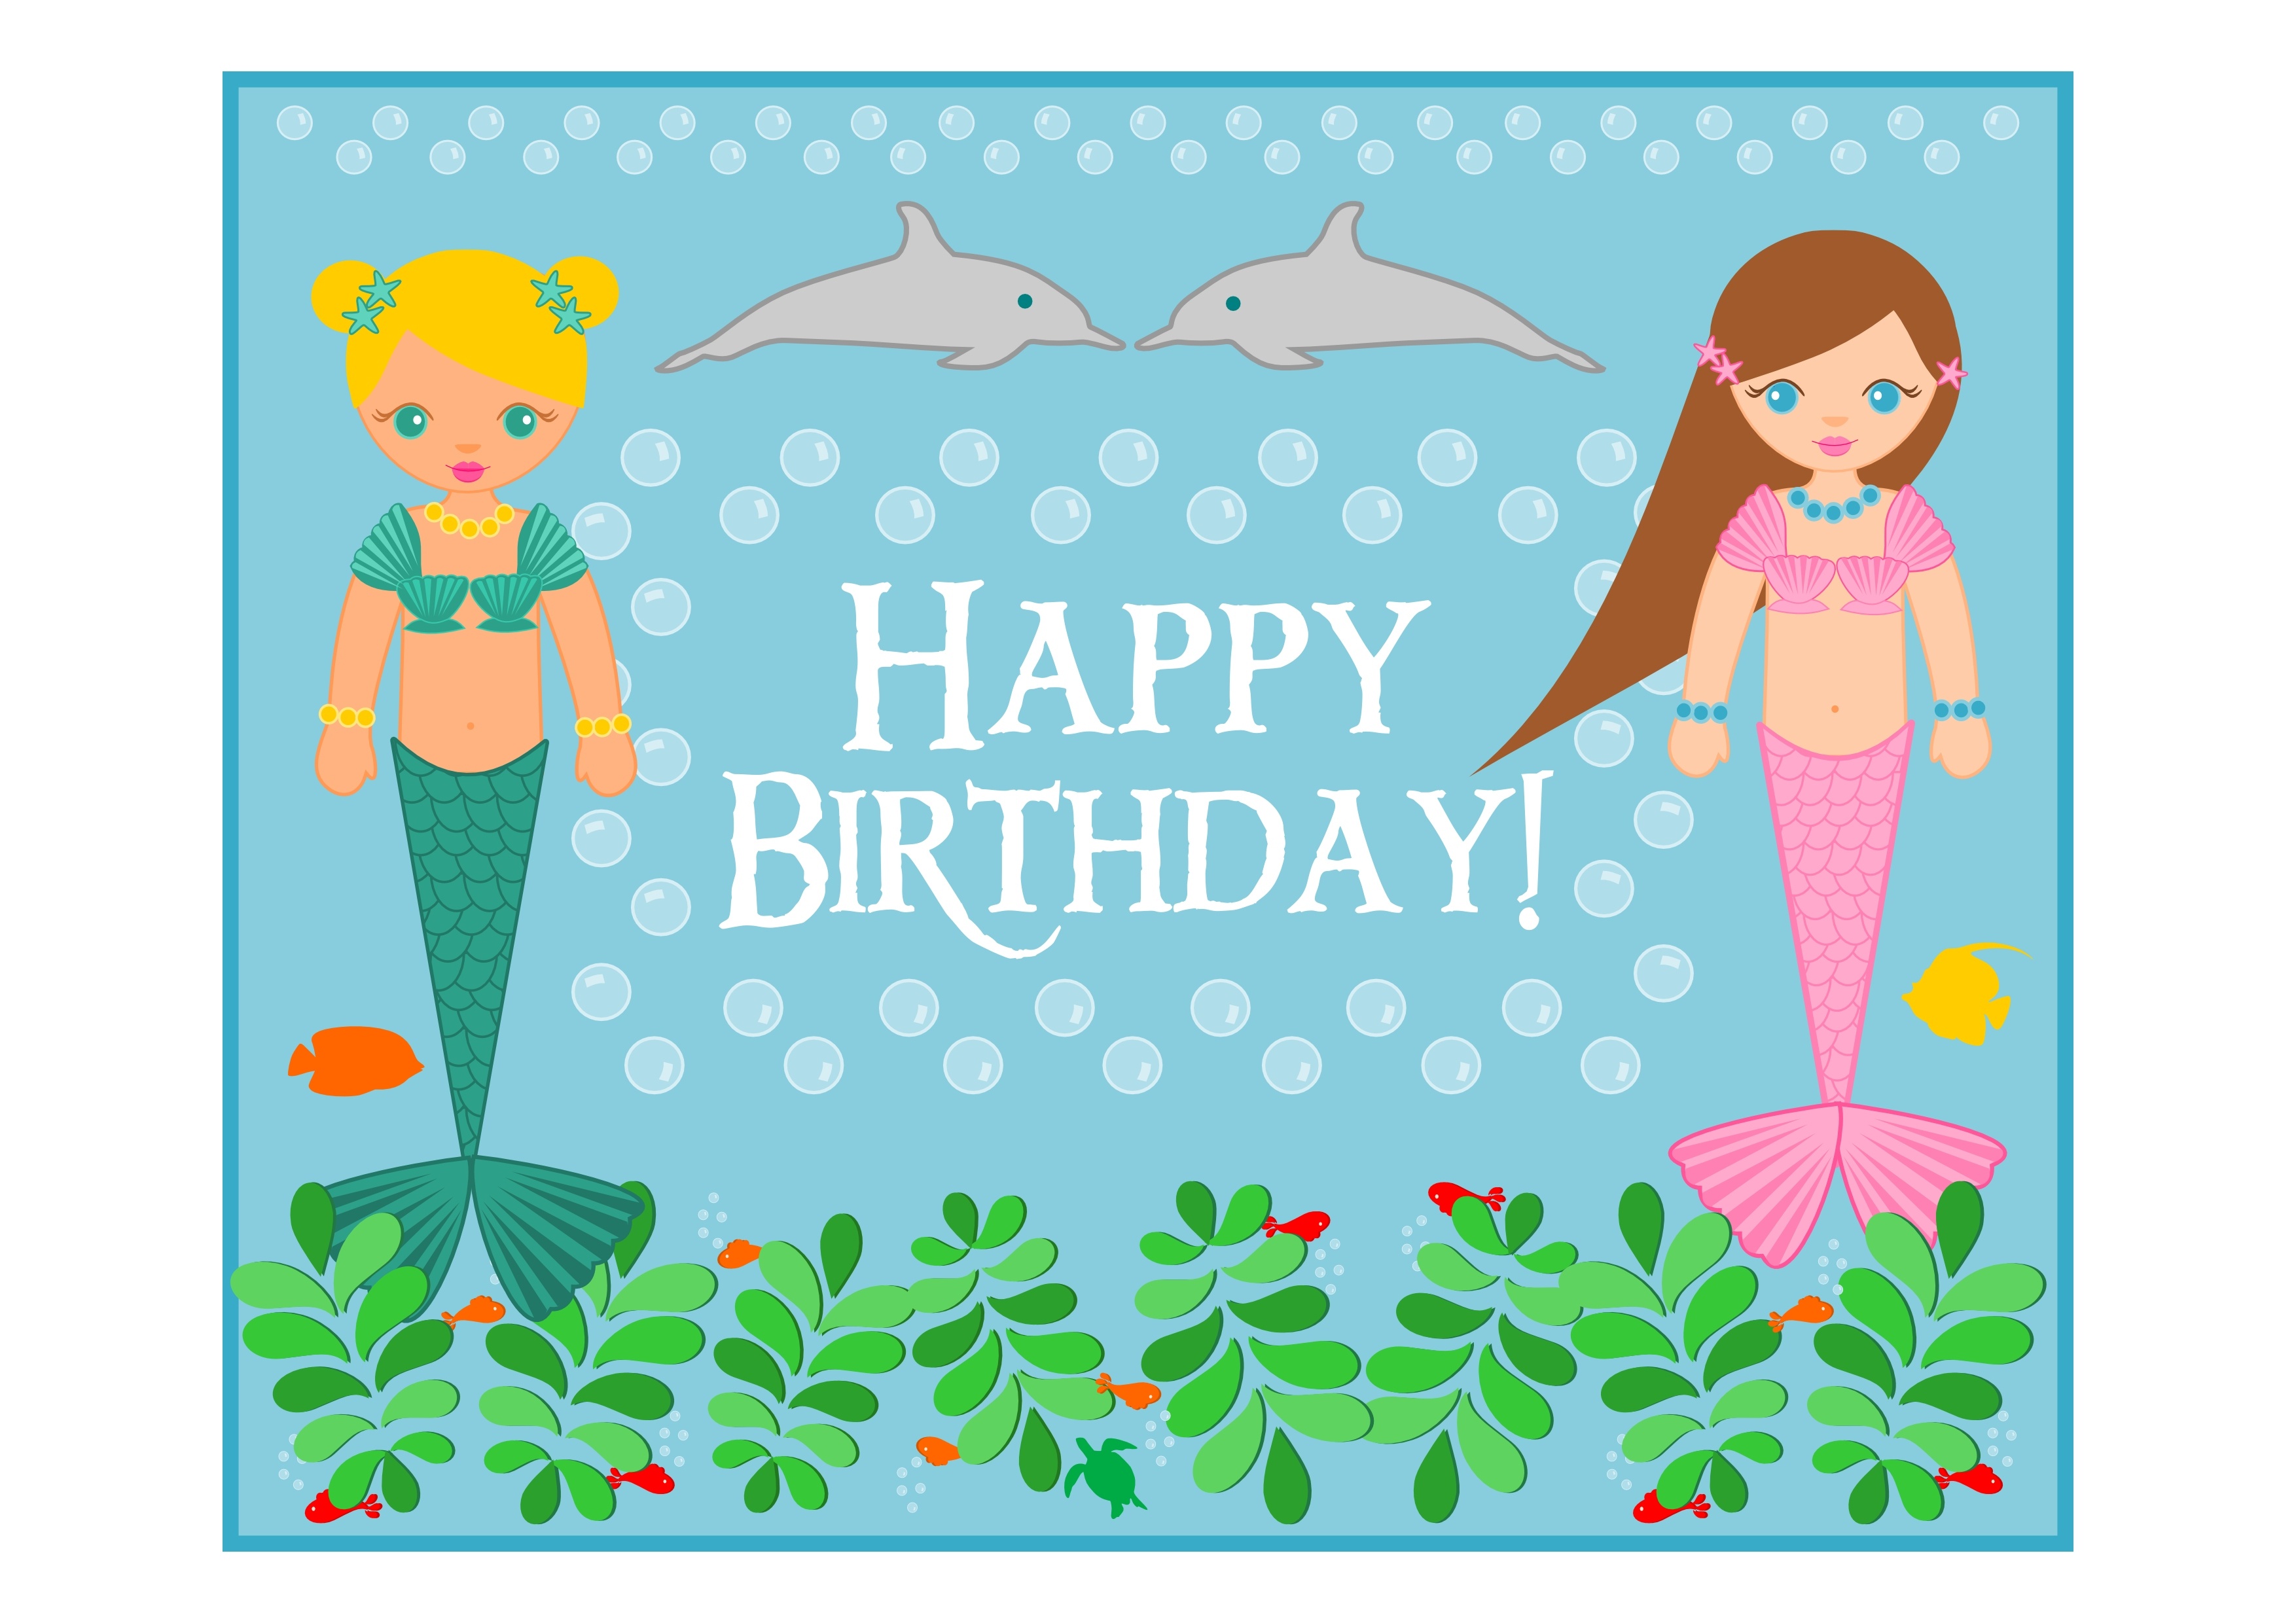 Free Mermaid Birthday Party Printables From Printabelle | Catch My Party - Free Printable Little Mermaid Birthday Banner